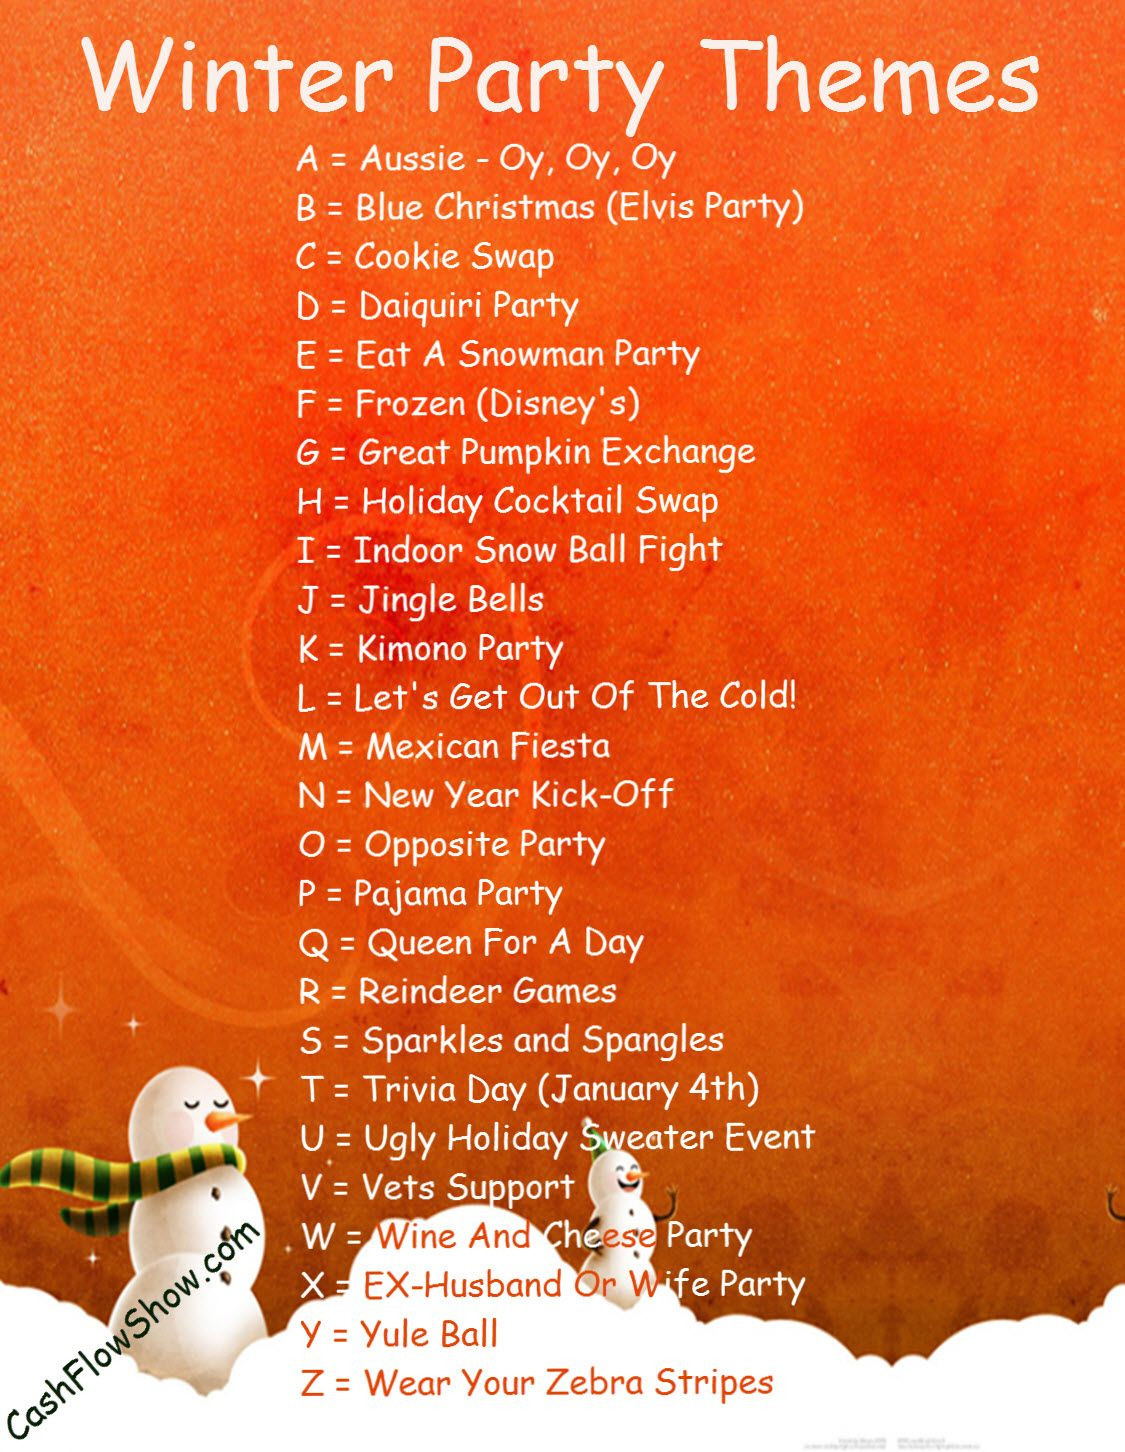 Fun Work Holiday Party Ideas
 A Winter party theme will add fun excitement and urgency